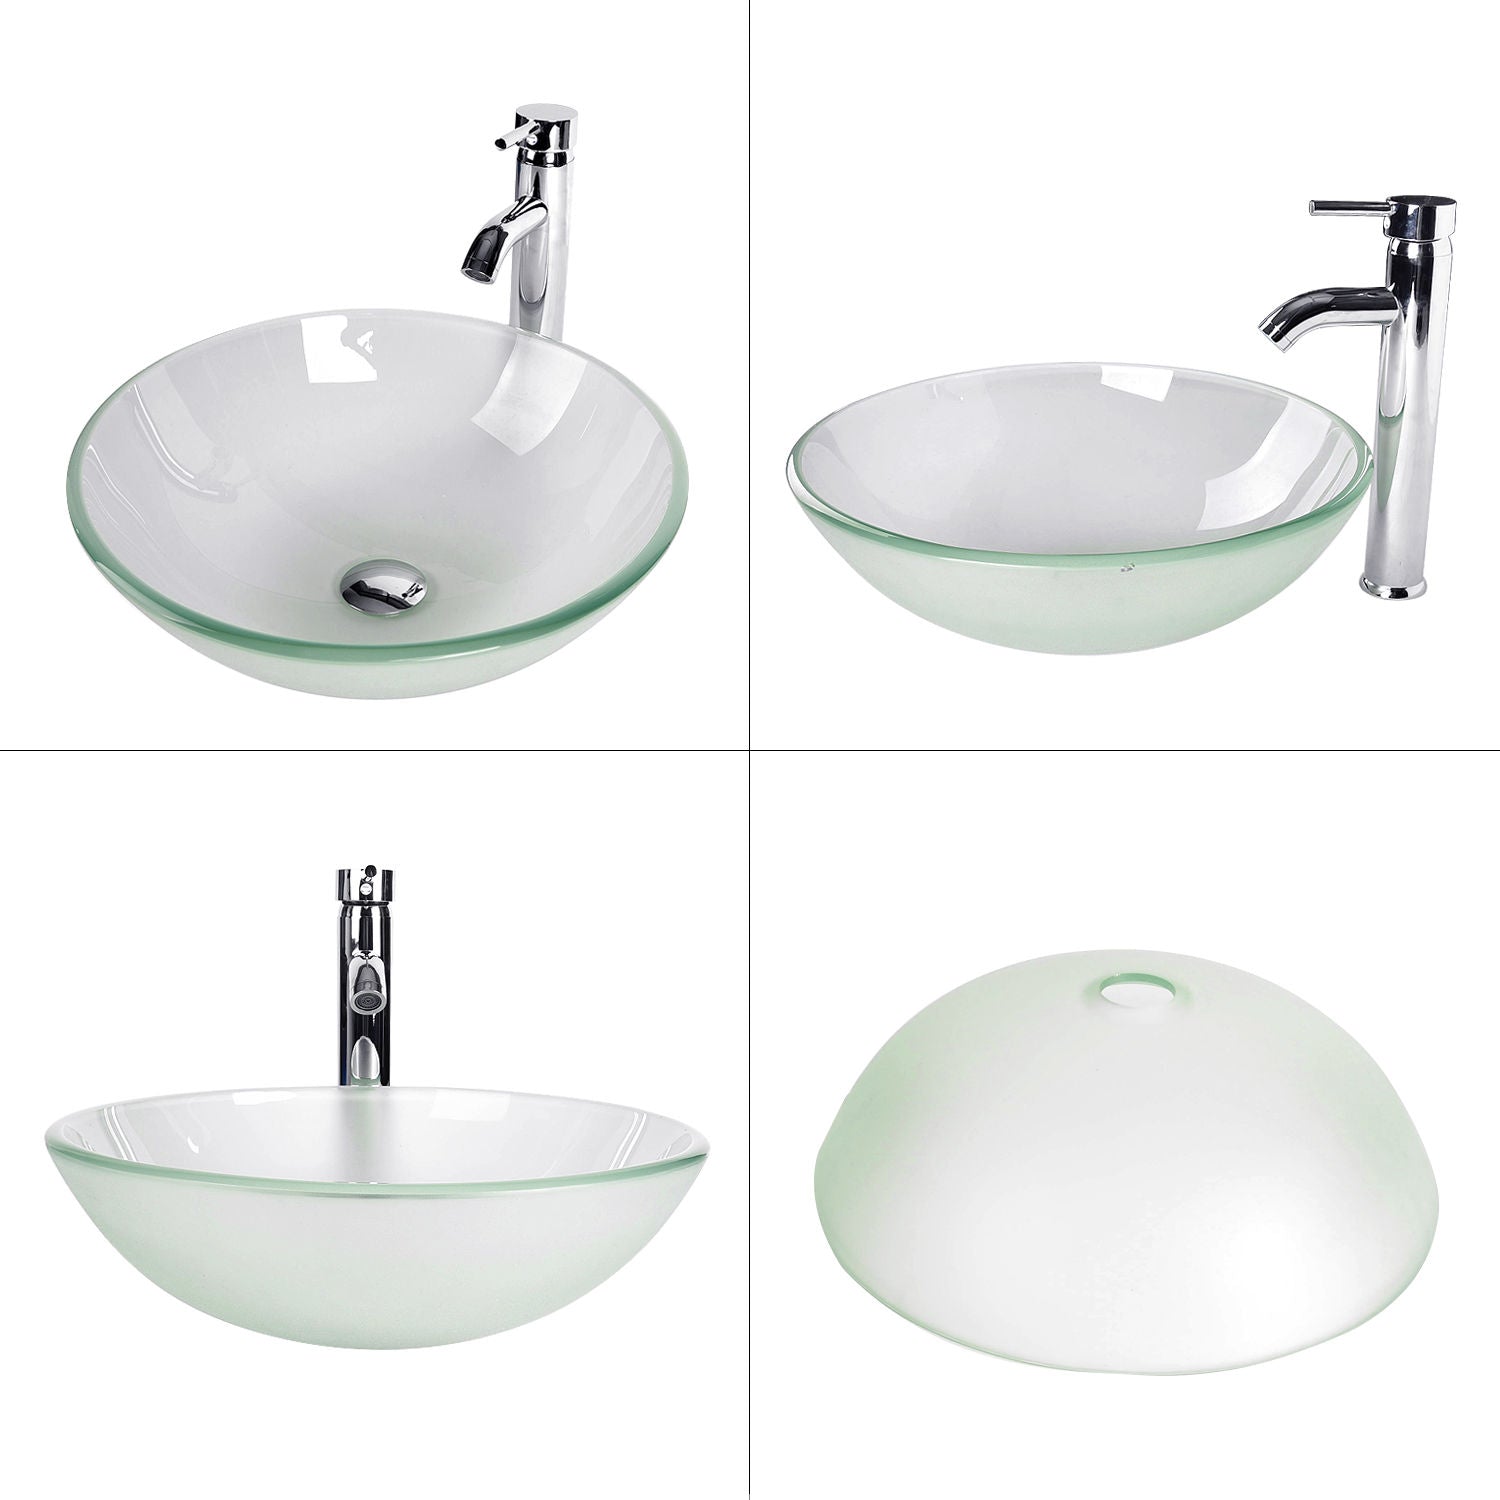 4 angle views of Elecwish clear green sink